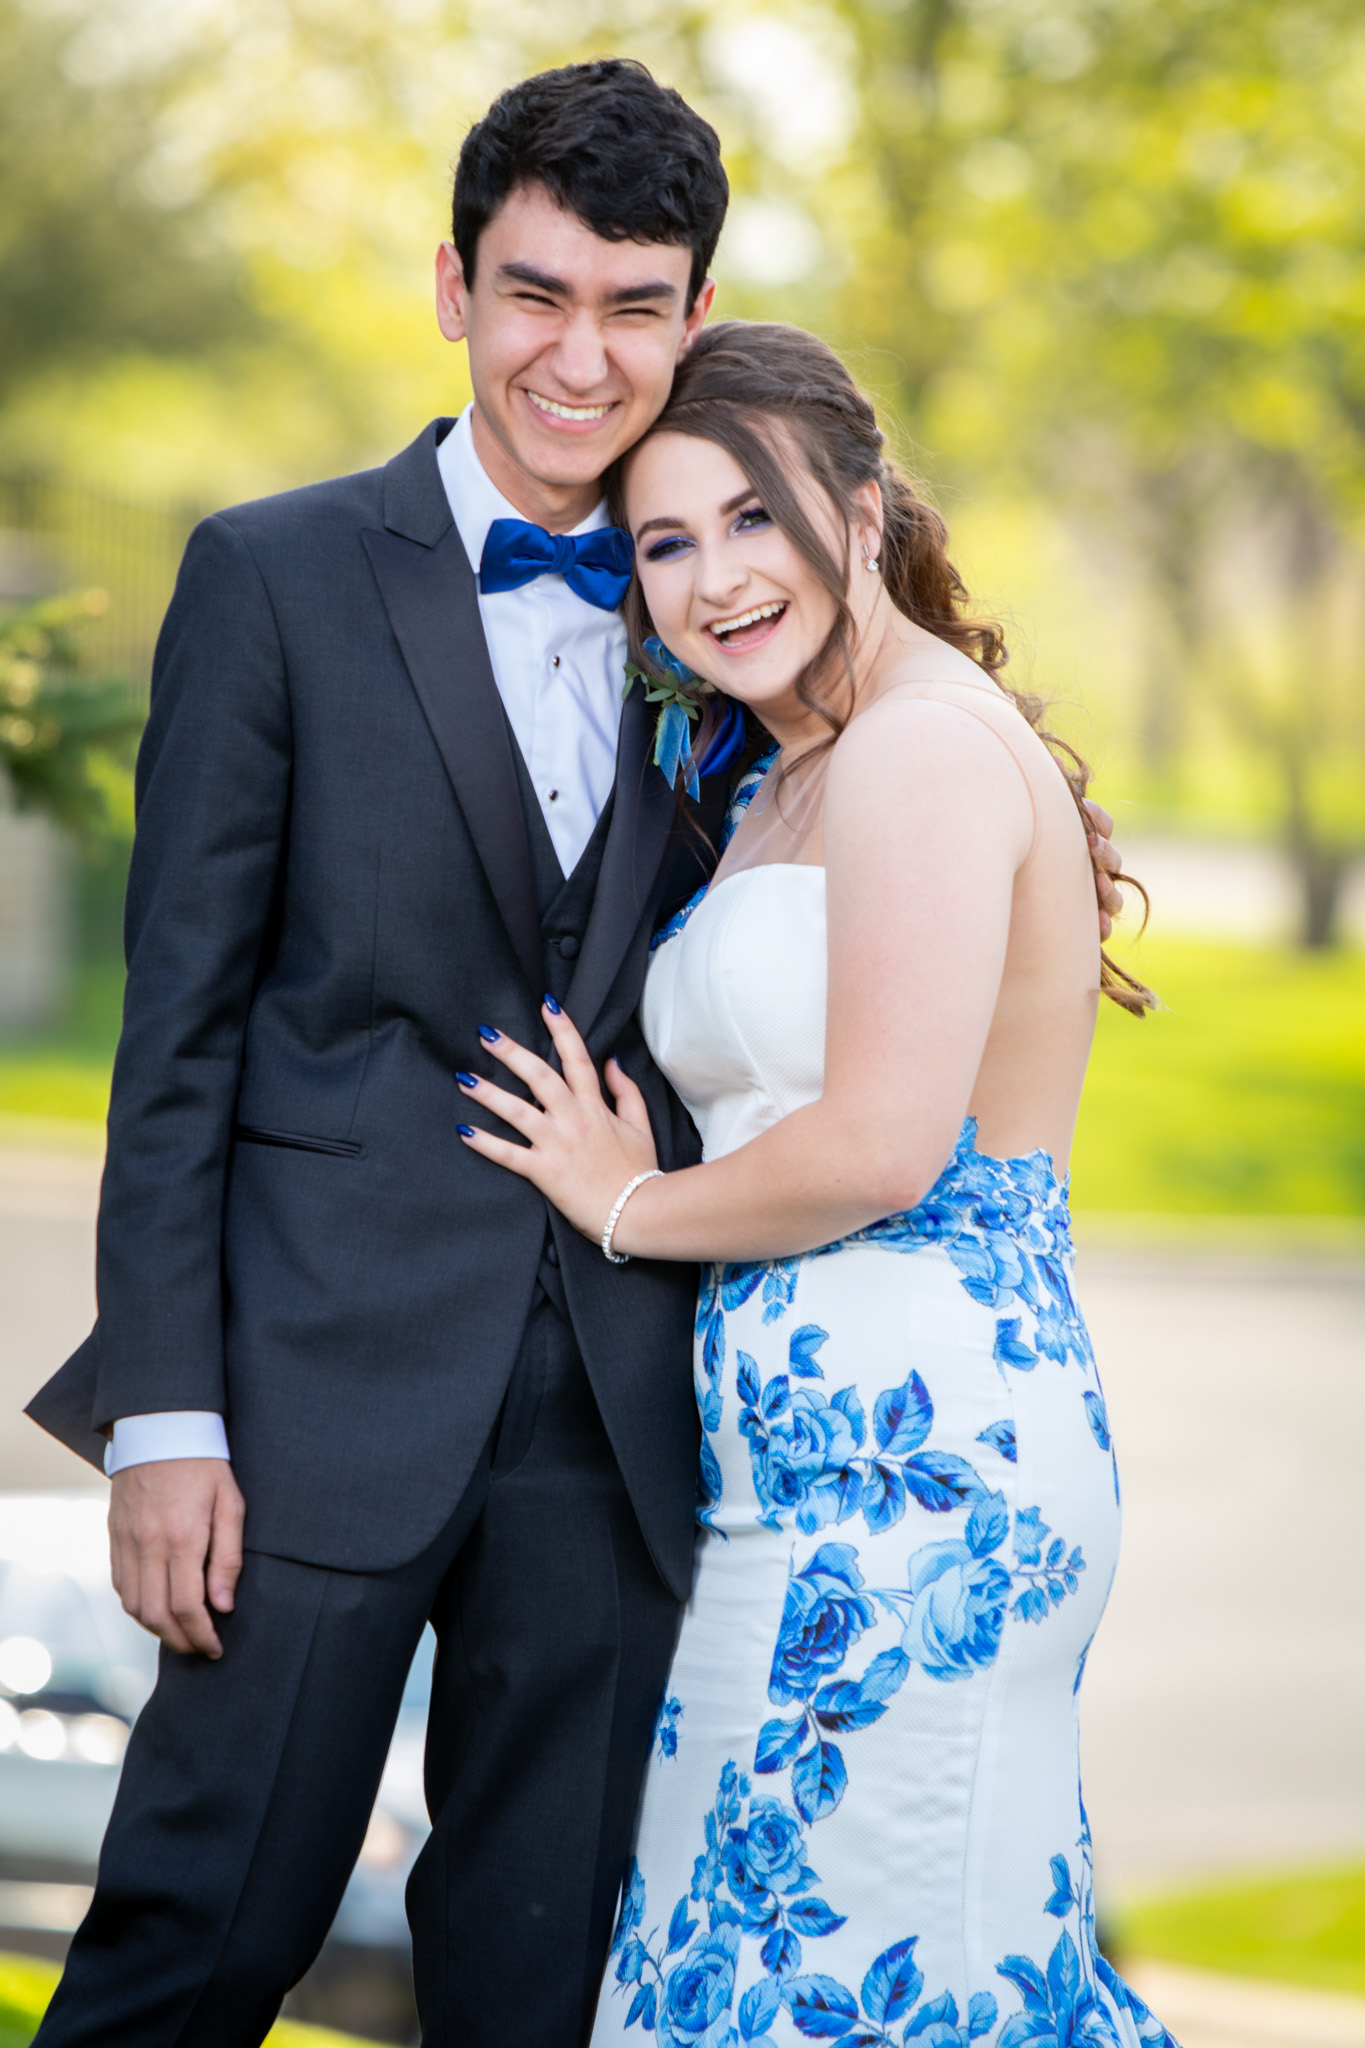 Prom Picture Poses for Couples | Romantic Prom Couples Photography